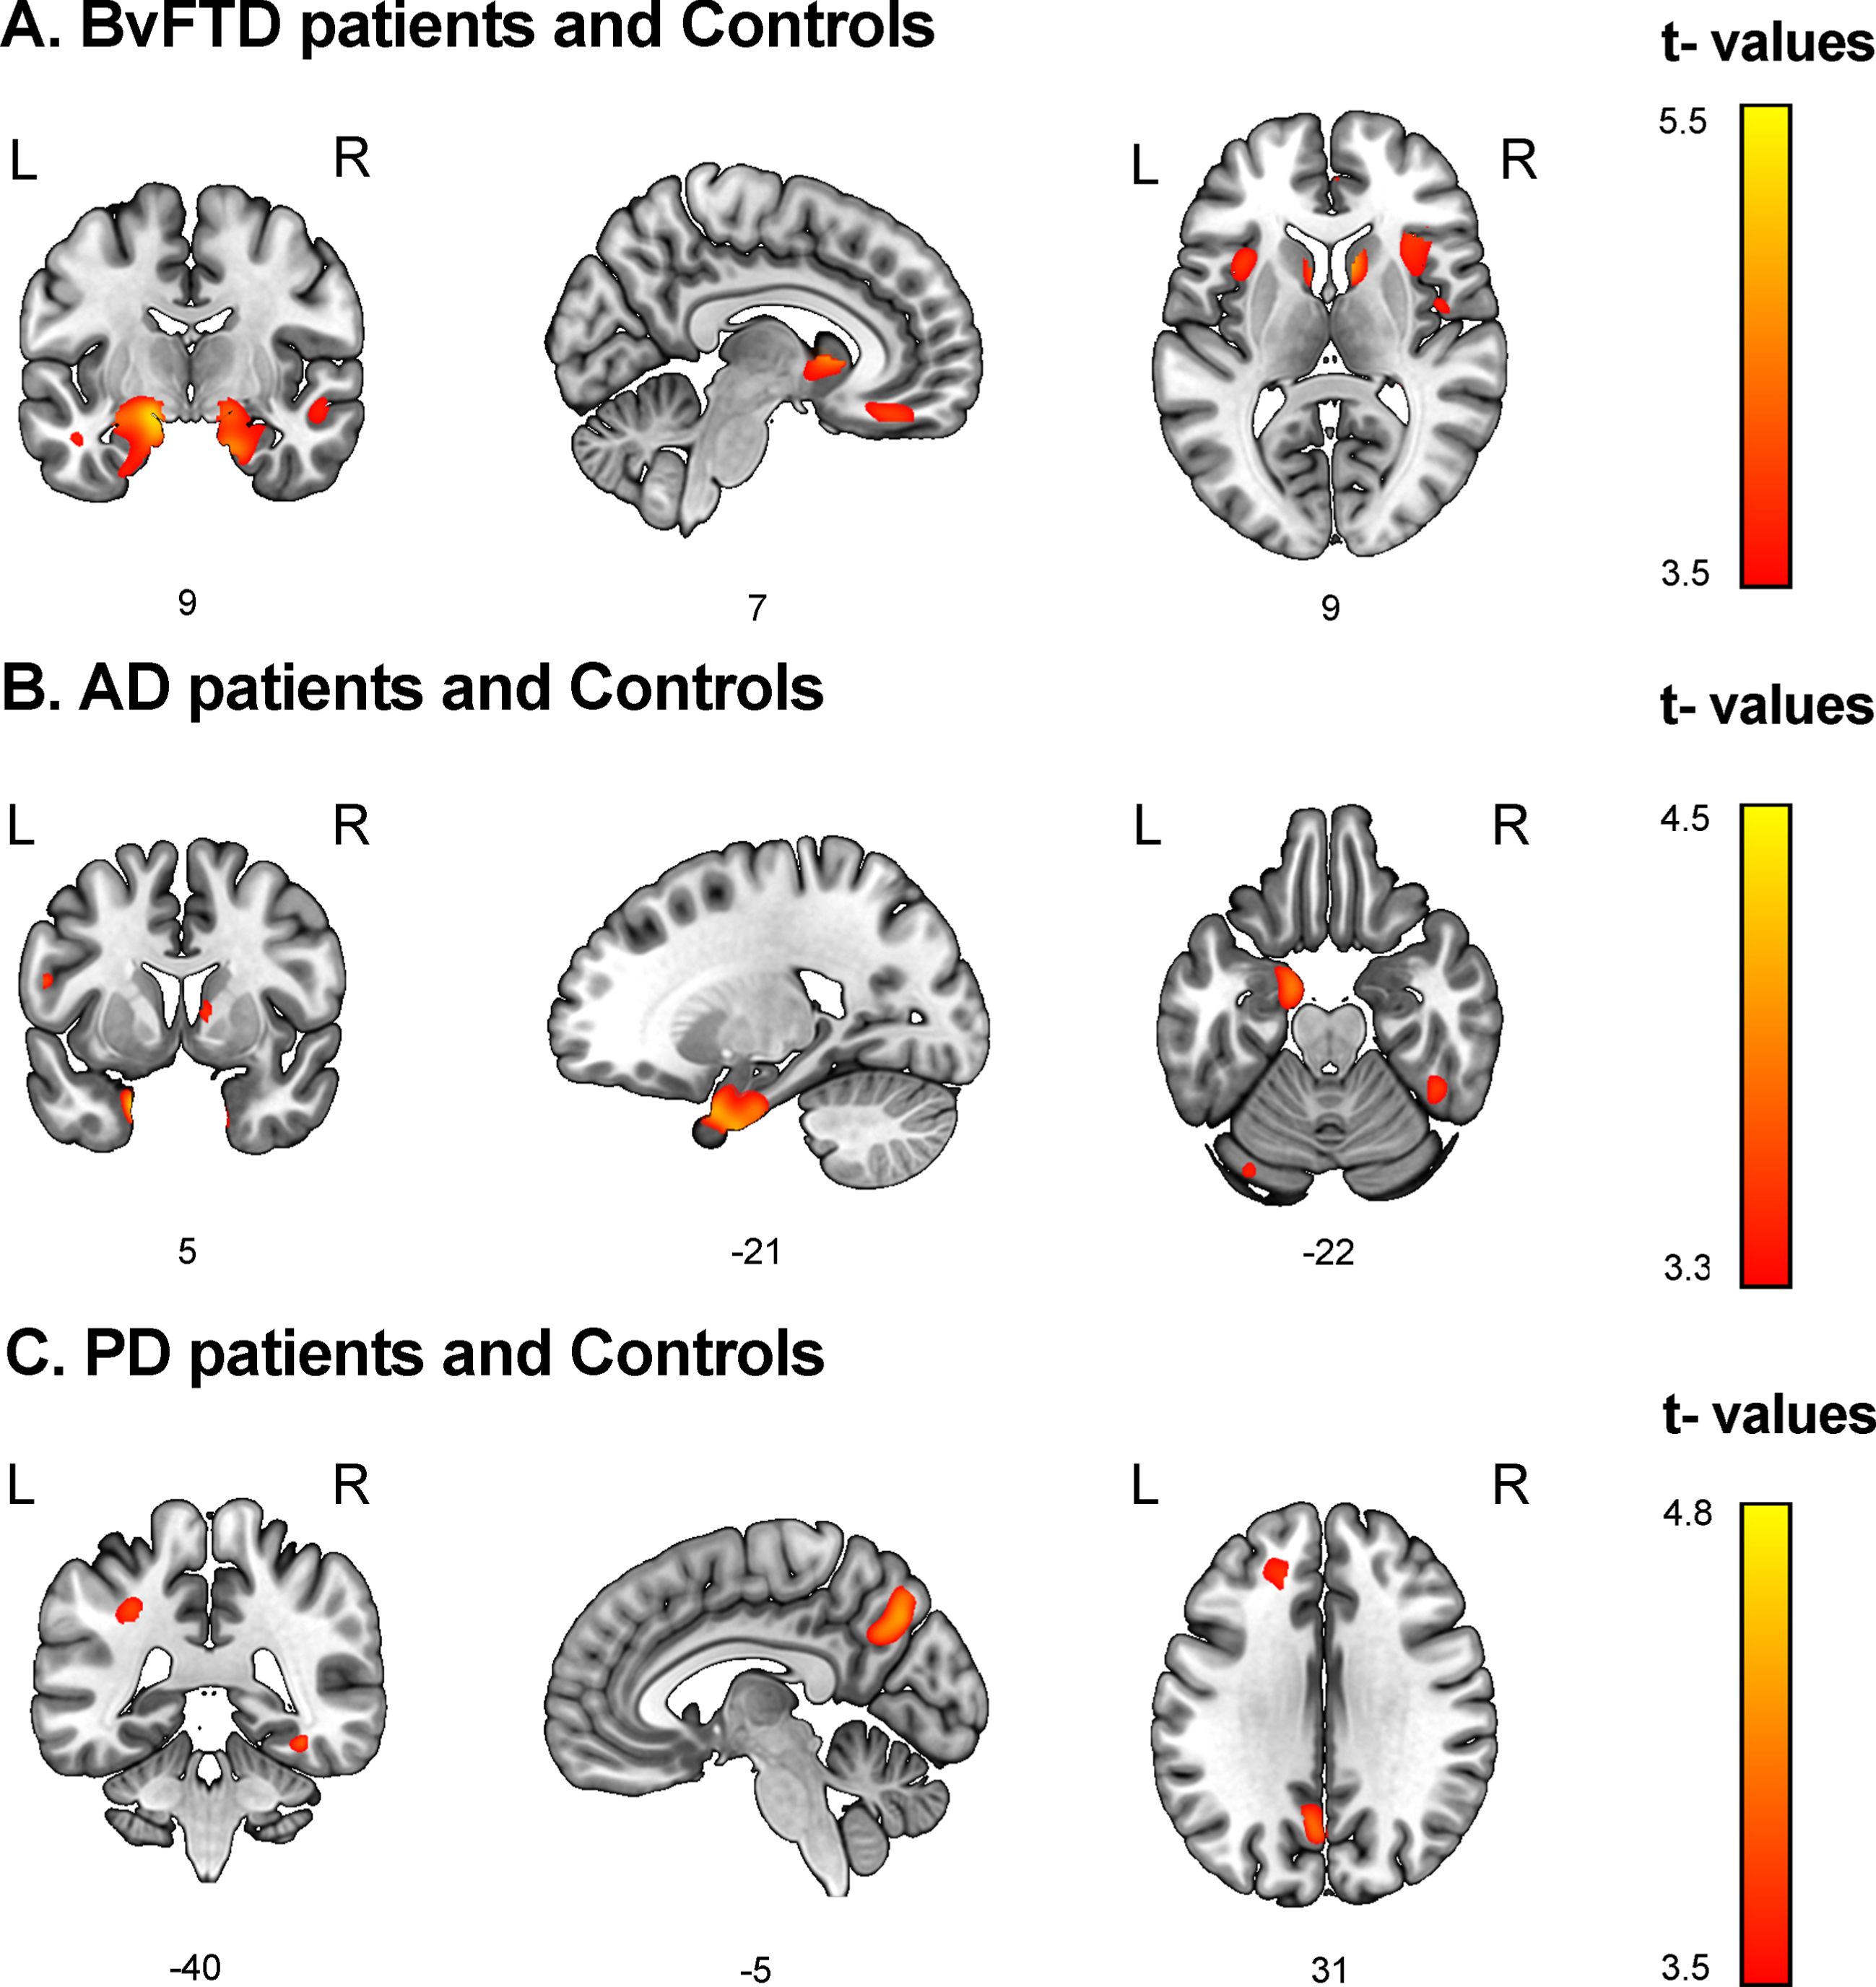 Associations between discriminant scores and gray matter volume. Voxel-based morphometry was conducted to identify brain regions associated with top discriminant scores in each patient group in tandem with demographically-matched controls (p < 0.001 uncorrected, extent threshold = 30 voxels). A) BvFTD patients and controls. Social cognition and CS (MiniSEA and MoCA) were associated with frontal (gyrus rectus, superior frontal gyrus), temporal (the superior, middle, and inferior temporal gyri, fusiform gyrus, hippocampus, and parahippocampal gyrus), parietal (postcentral gyrus), and insular regions as well as the basal ganglia. B) AD patients and controls. CS (MoCA) results were associated with temporal (hippocampus, amygdala, parahippocampal gyrus, superior temporal, and fusiform gyri), frontal (superior frontal gyrus), and parietal (postcentral gyrus) regions. C) PD patients and controls. Social cognition (MiniSEA) outcomes were associated with parietal (inferior parietal lobule and precuneus), frontal (frontal superior gyrus and anterior cingulate cortex), and temporal (superior temporal and fusiform gyri) regions. AD: Alzheimer’s disease; bvFTD: behavioral variant frontotemporal dementia; L, left; PD, Parkinson’s disease; R, right.